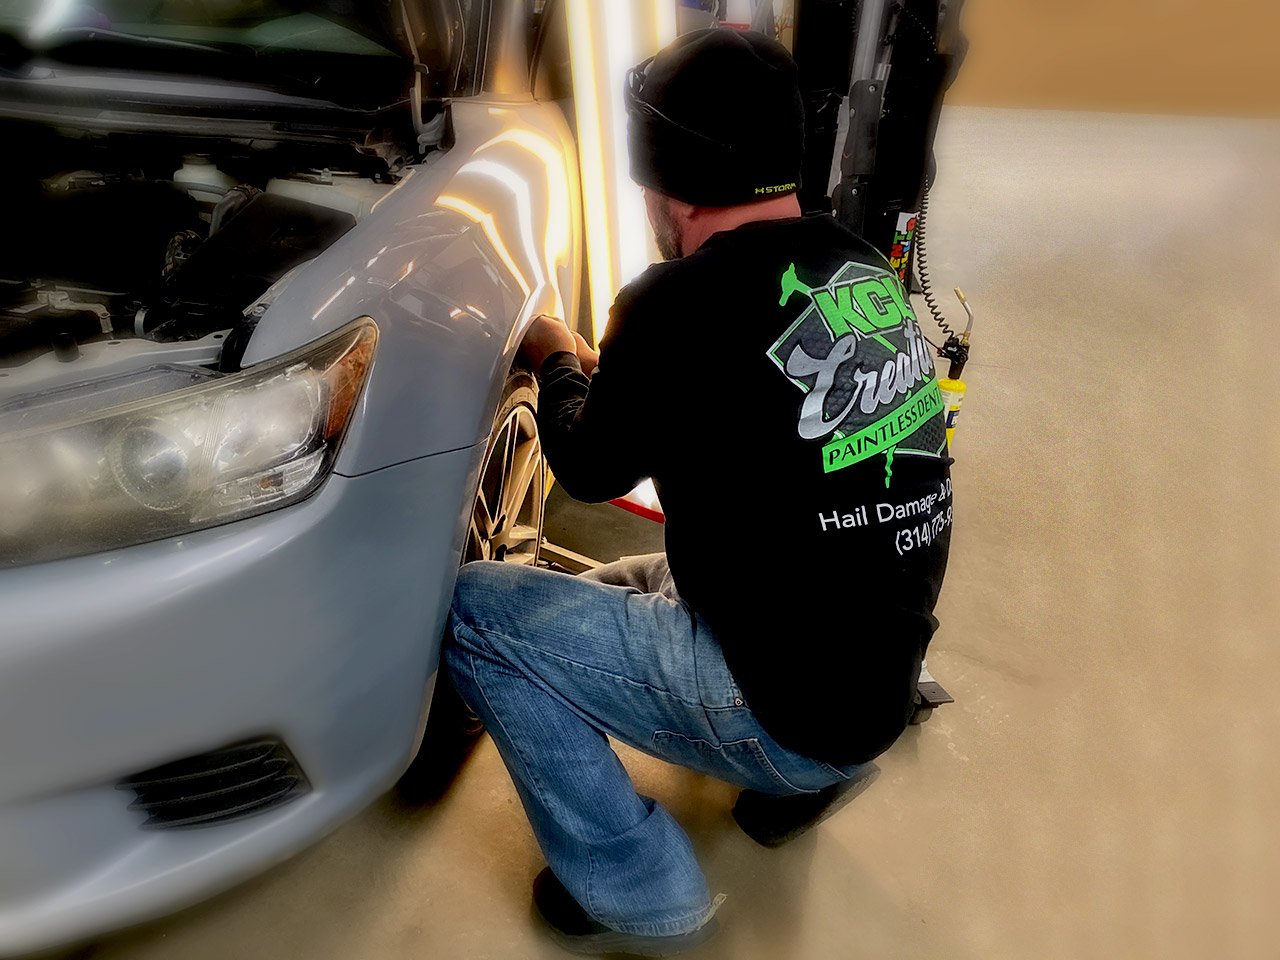 KCL Creations—Repair Tech removing dents with PDR